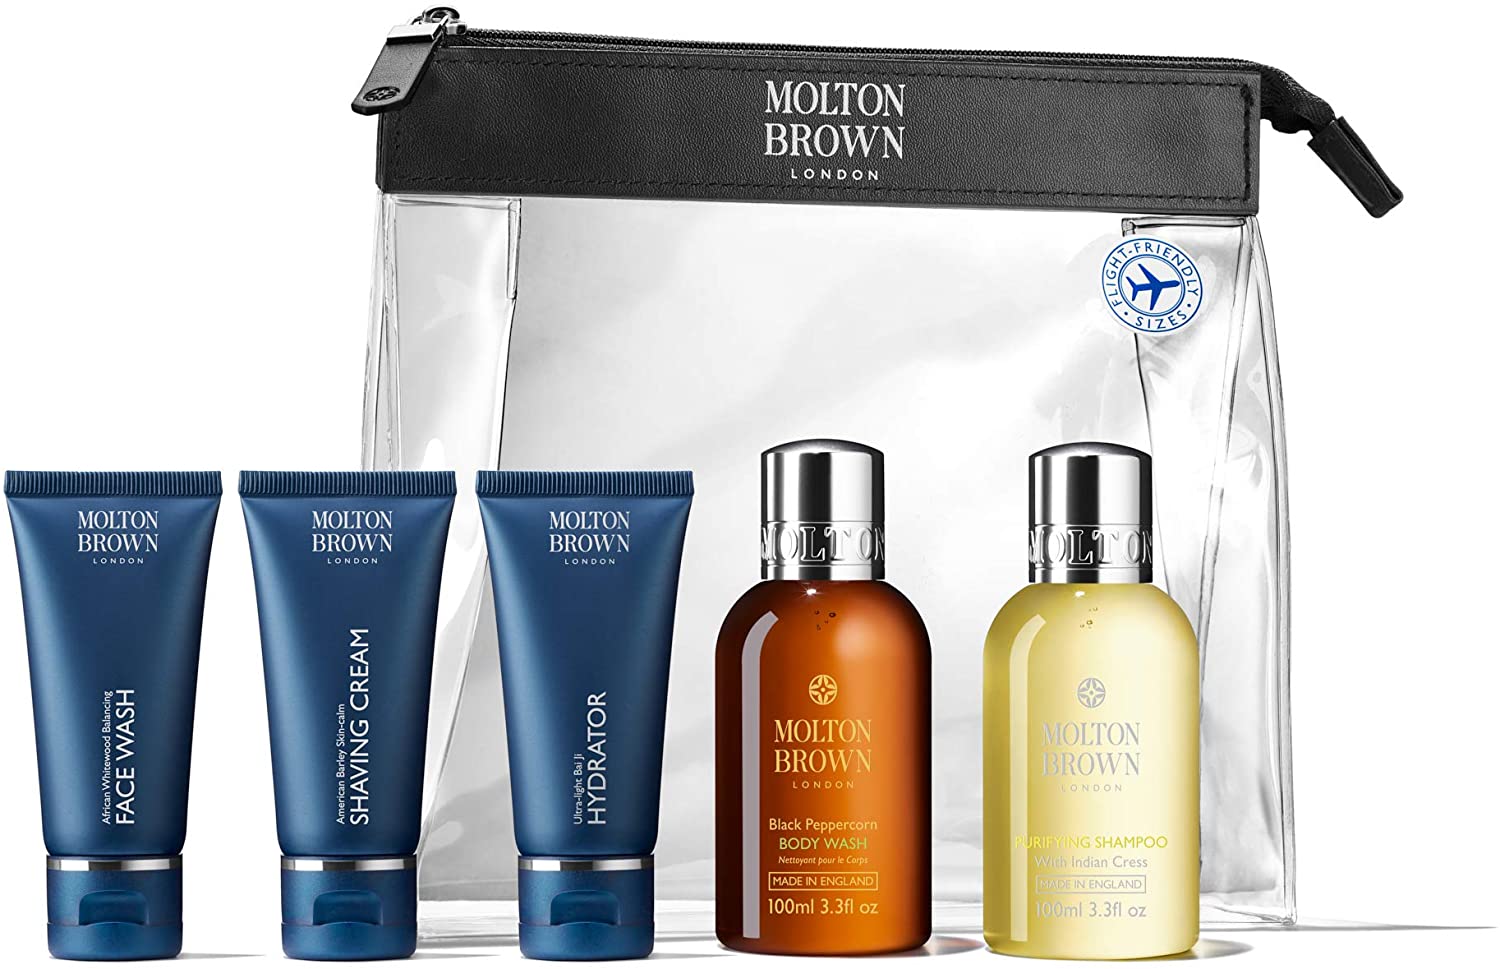 Molton Brown Body Care Set For Men S Travel Luxuries 5-Piece Set